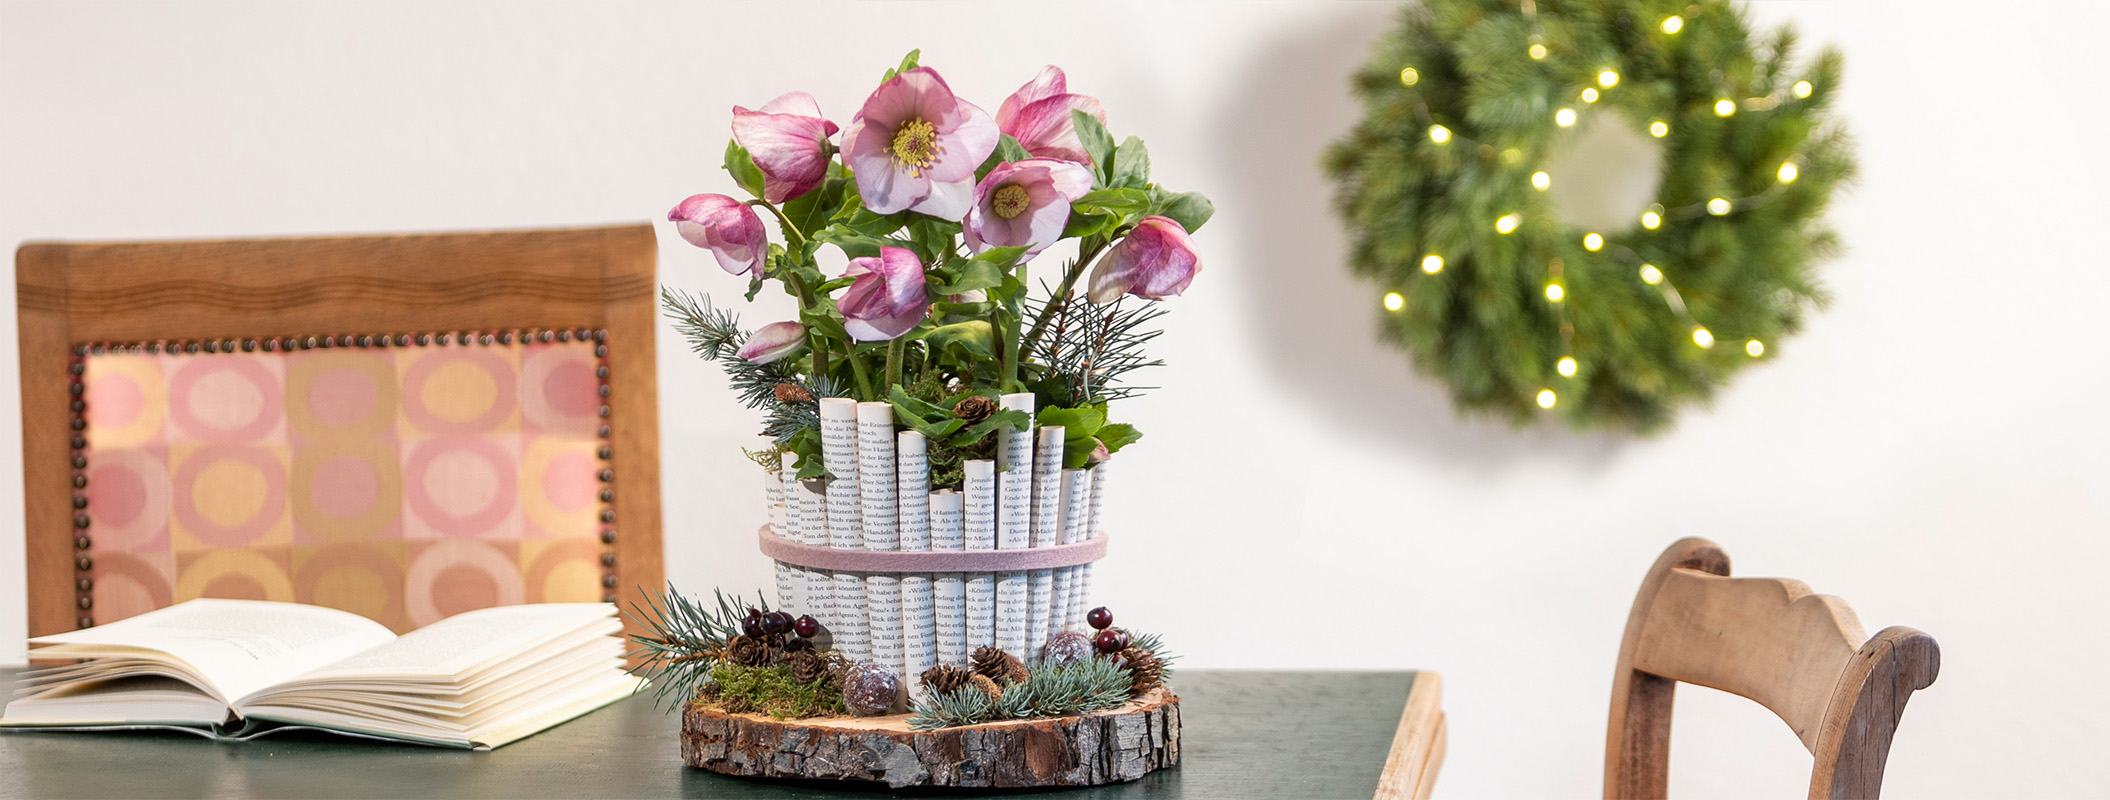 Christmas Rose in an upcycling planter with rolled up book pages